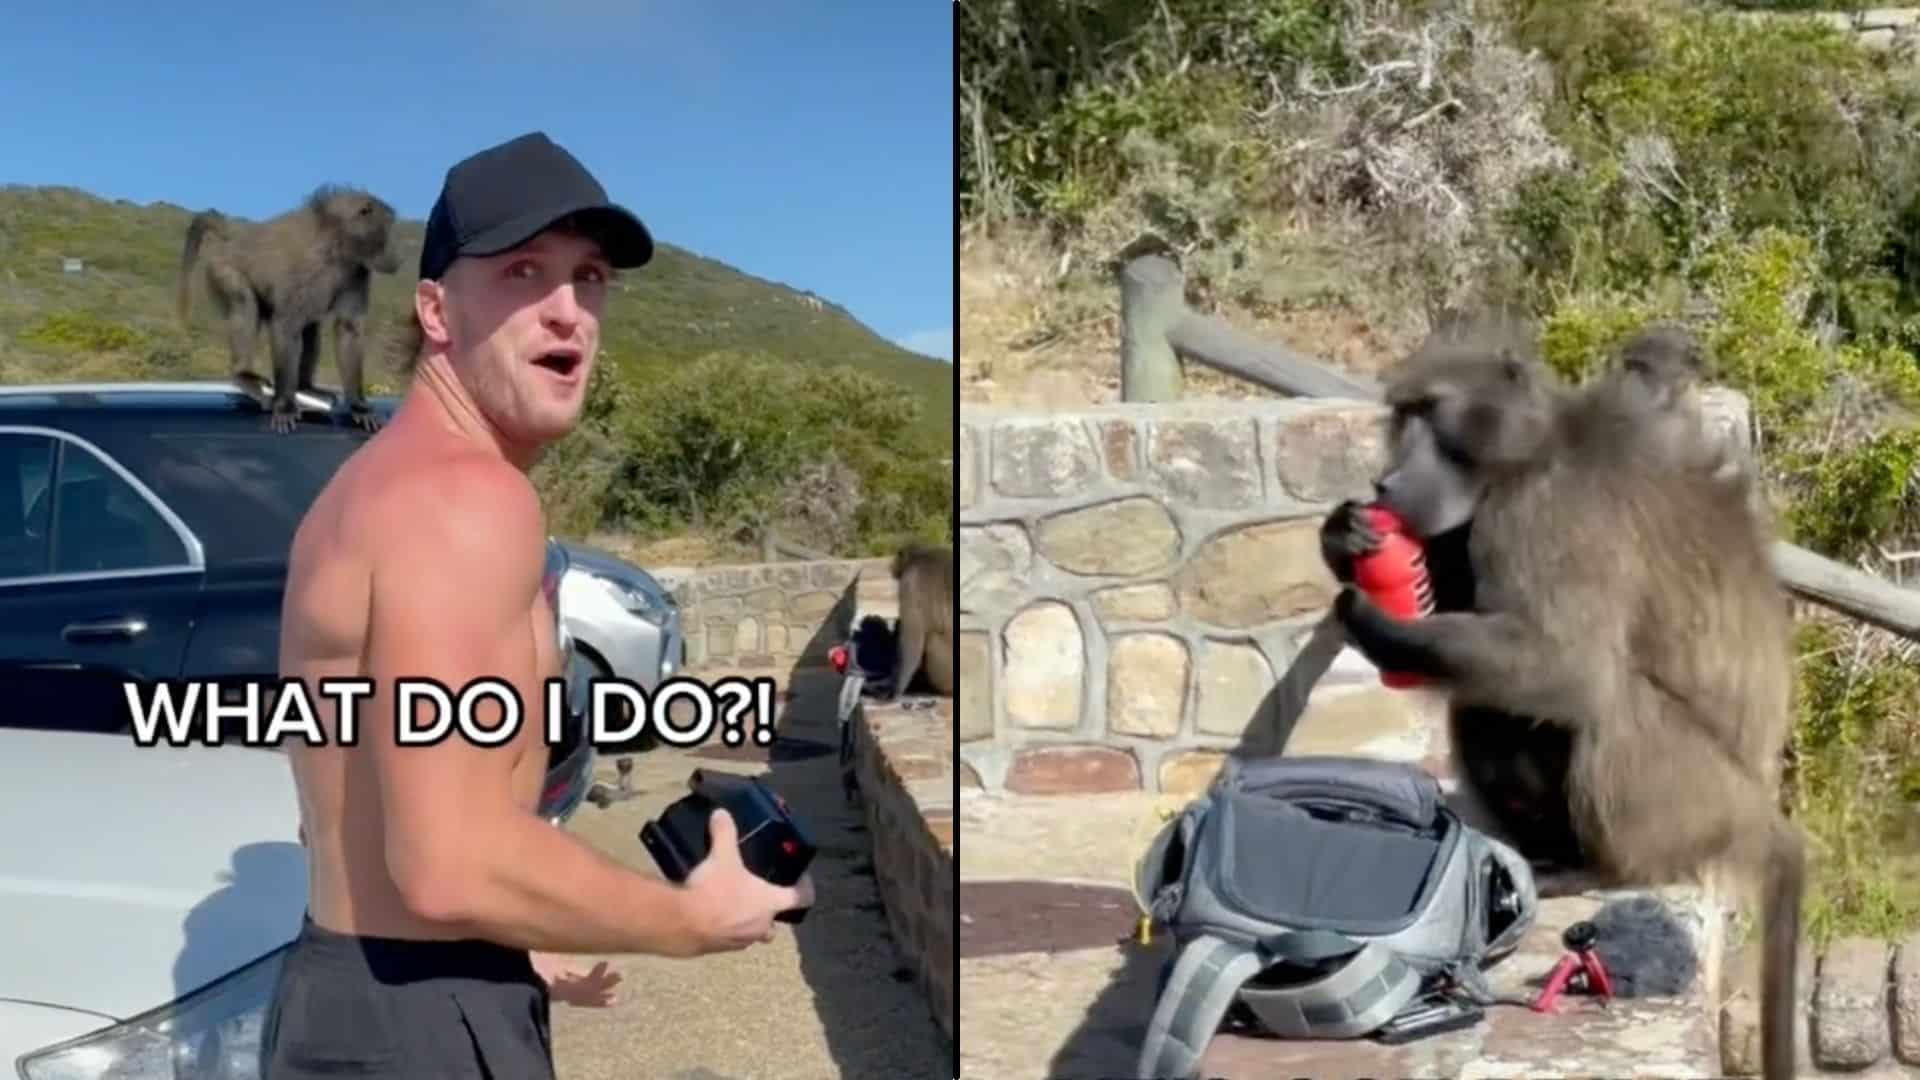 Jake Paul side-by-side with a moneky holding red bottle of prime hydration